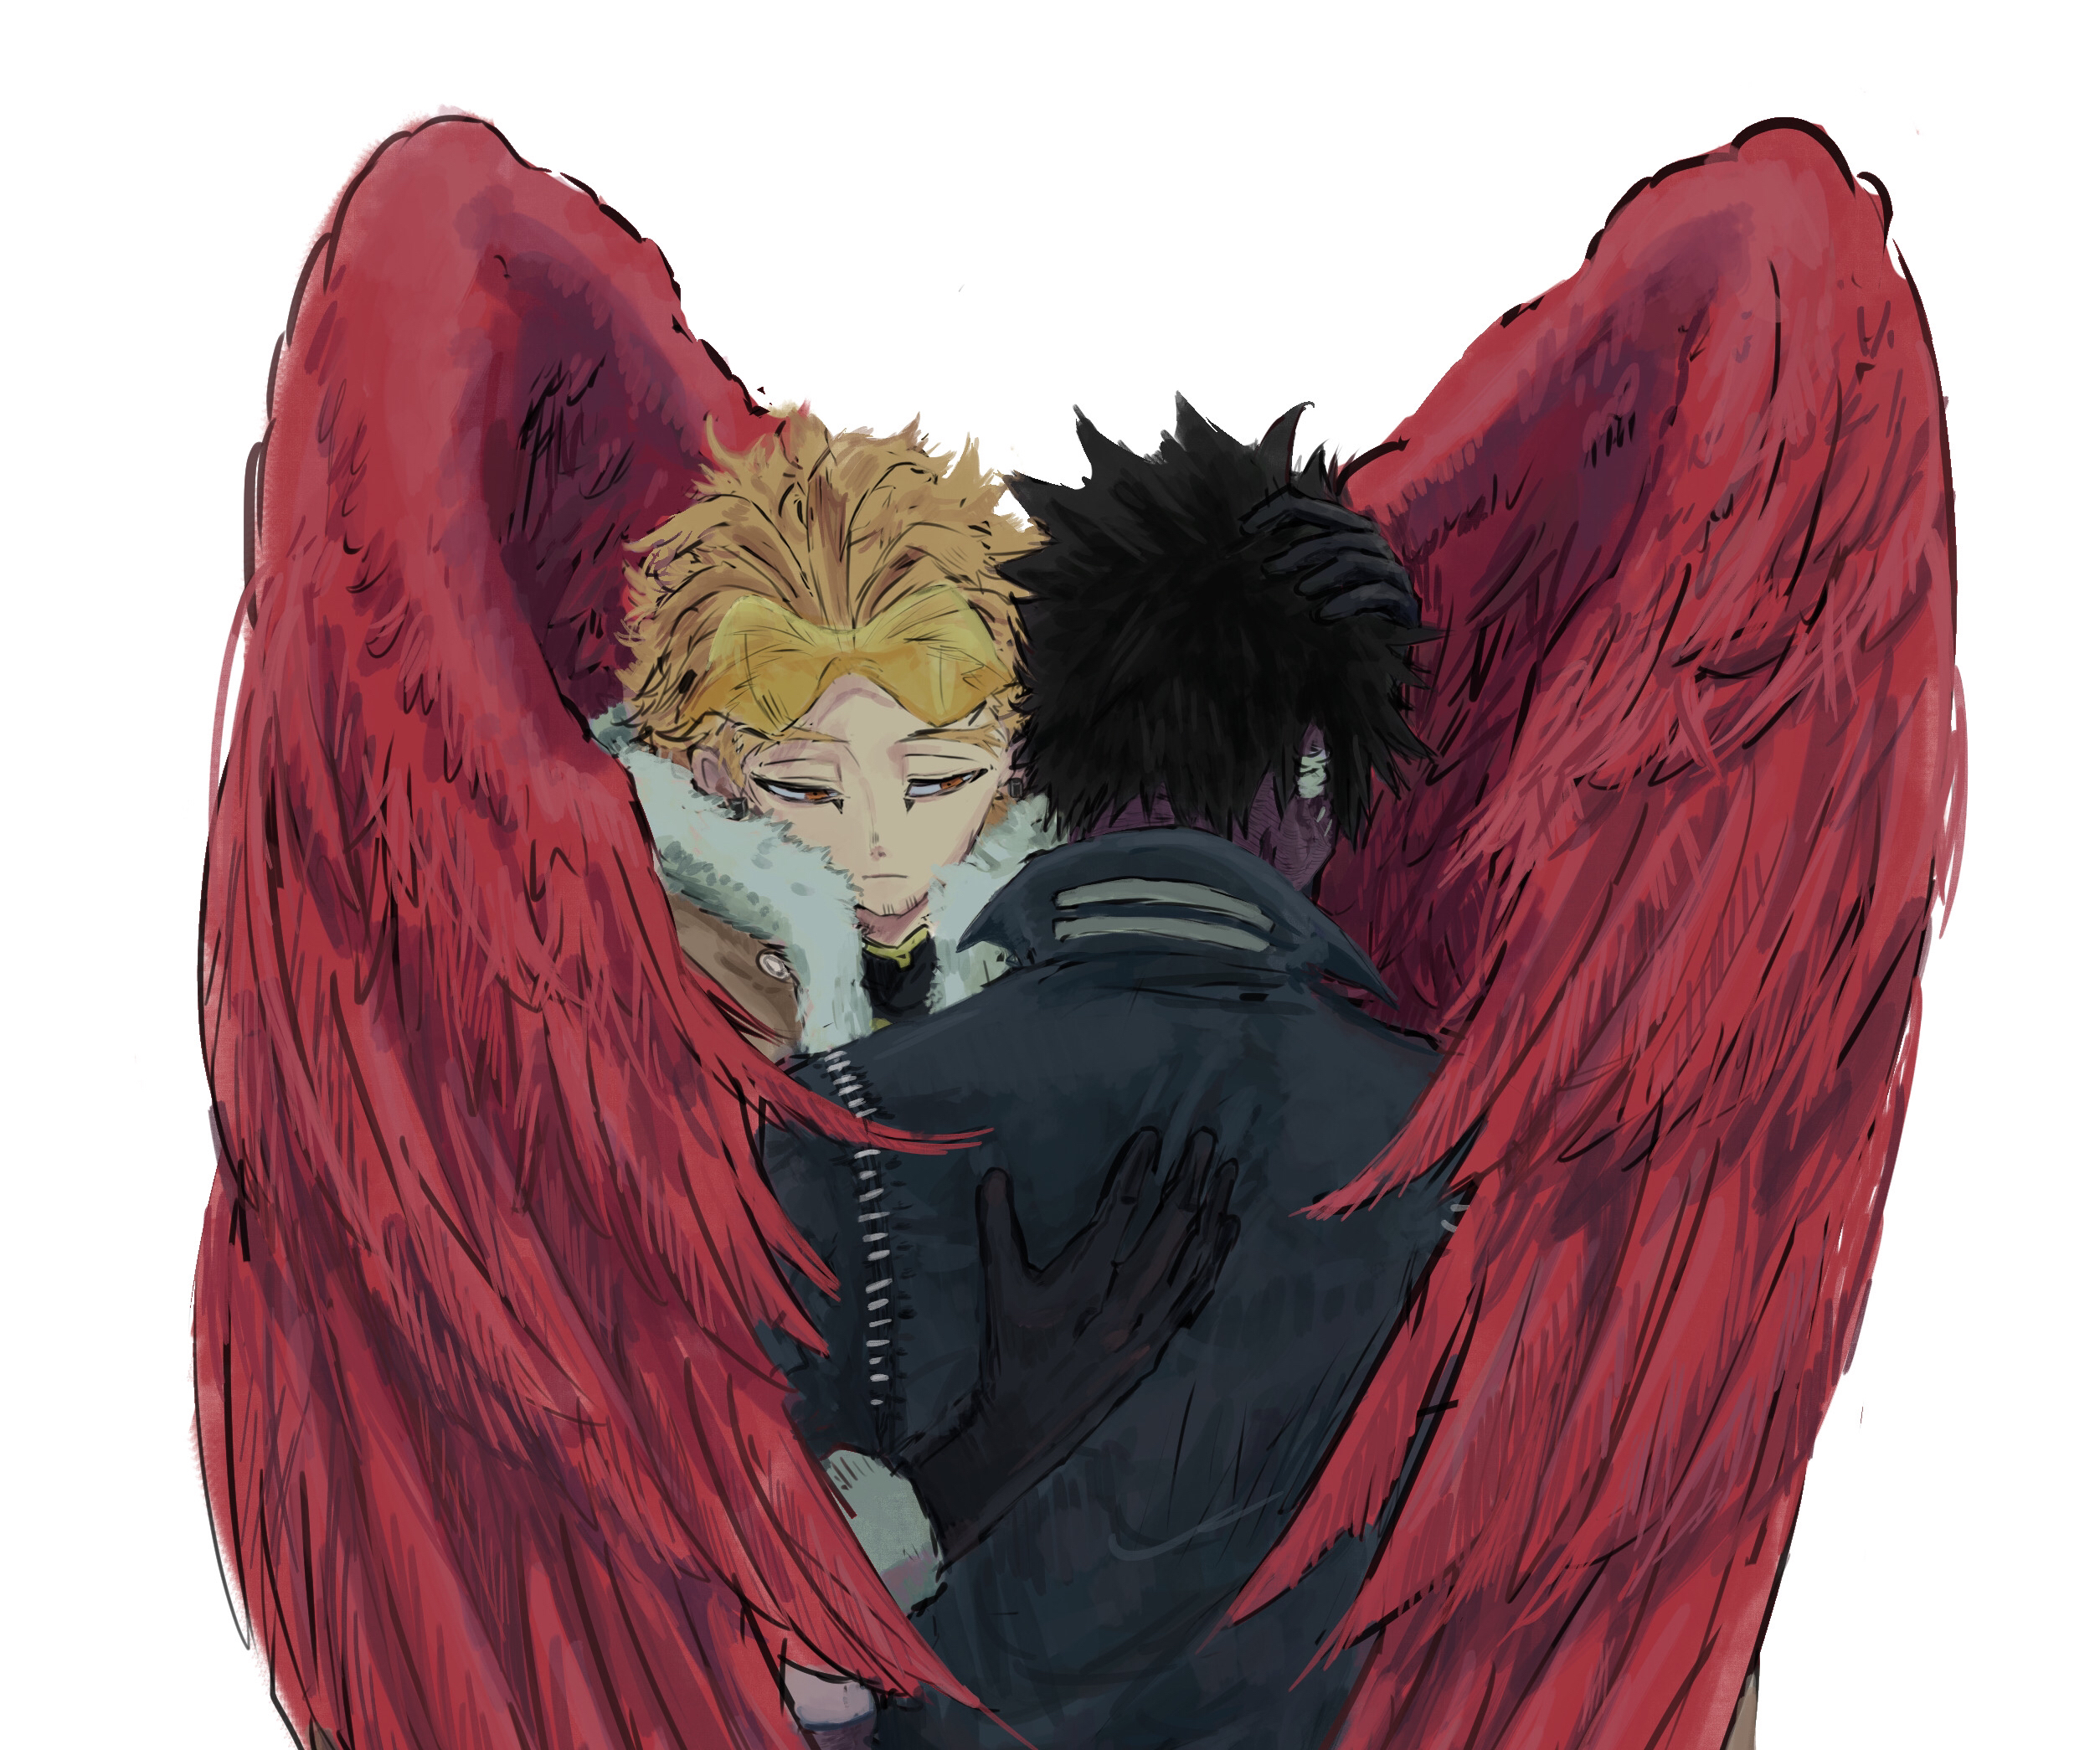 Download Hawks bnha wallpaper by Phenoxedits  78  Free on ZEDGE now  Browse millions of popular anime Wallpapers and Ringtones   Anime  background Hawk Anime